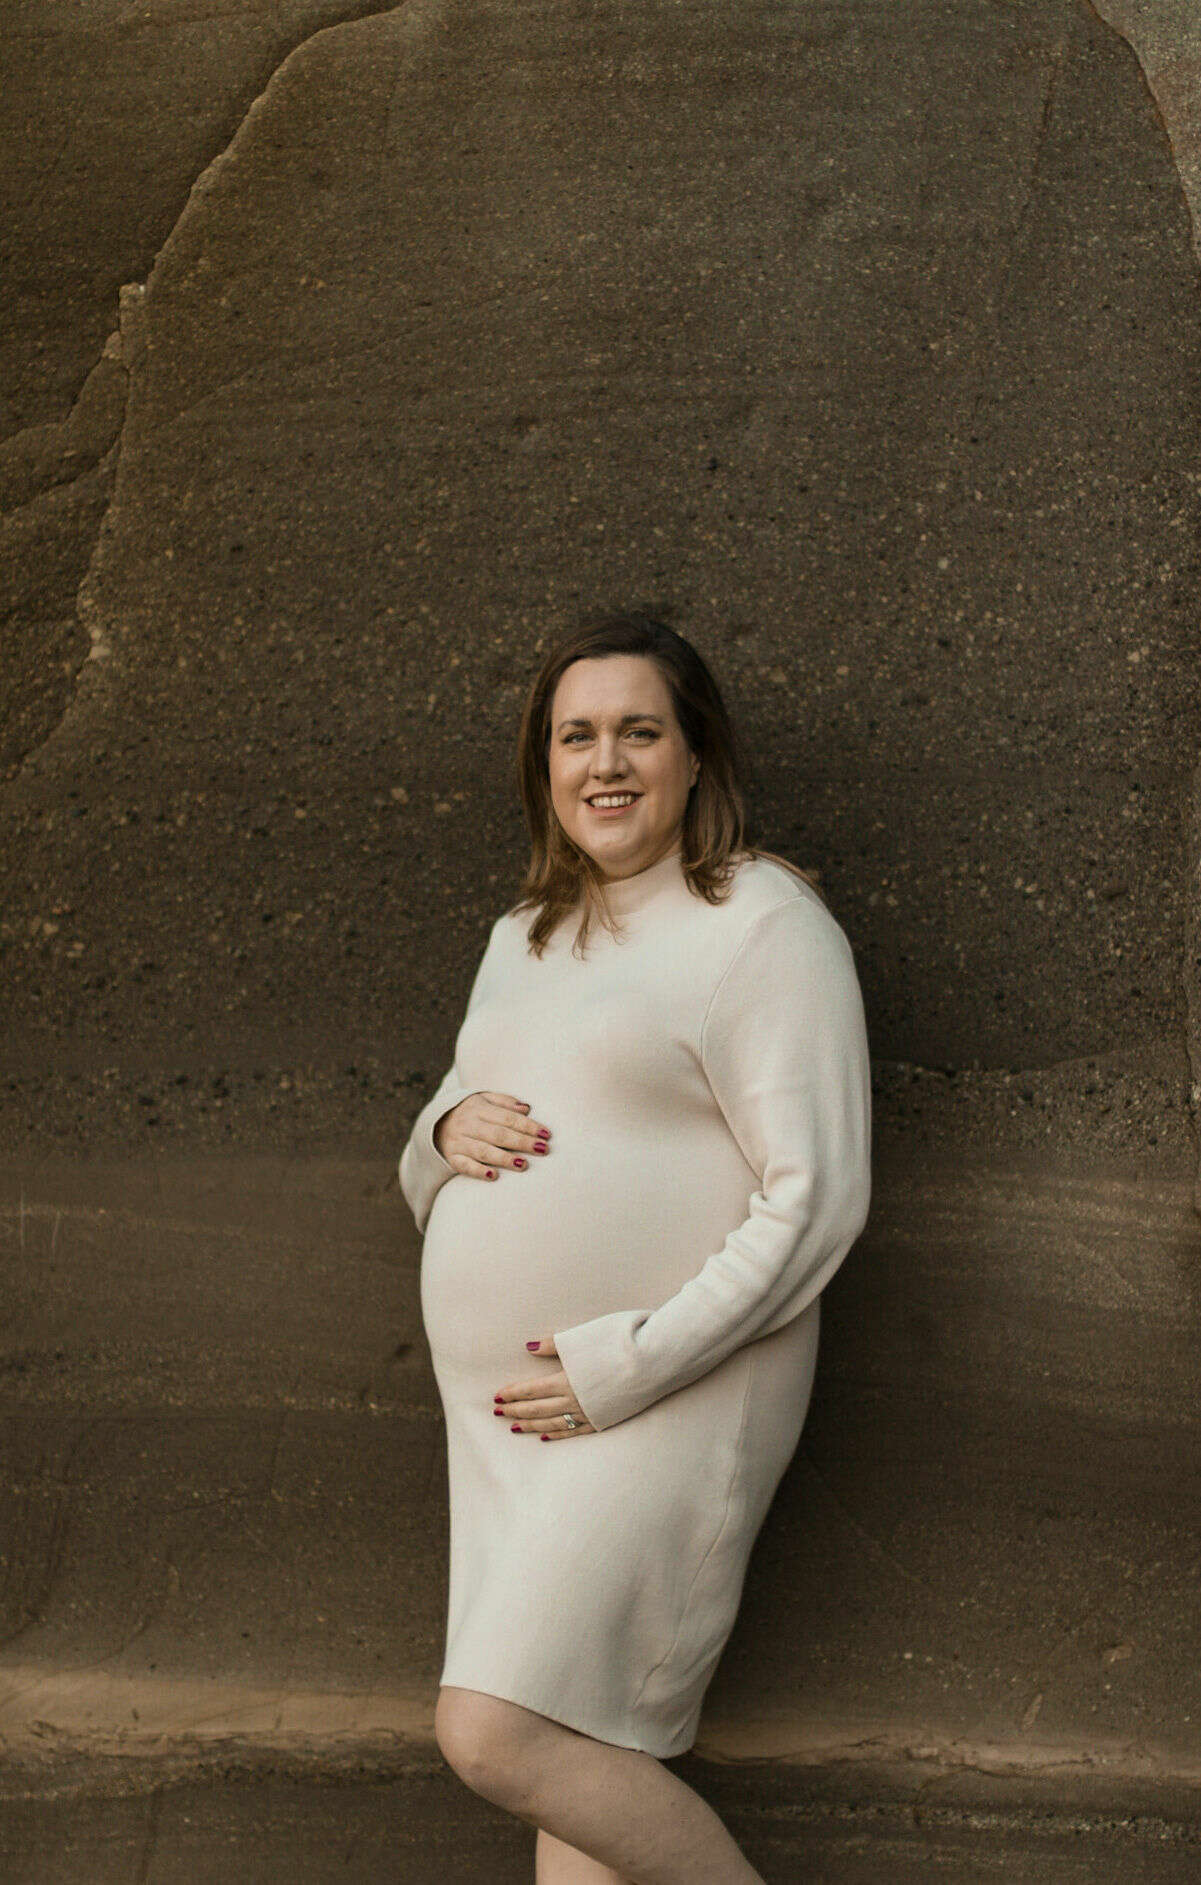 Natalie holds her pregnant belly wearing a cream jumper dress and stands against a cliff rock face. She has brown shoulder length hair and is smiling into the camera